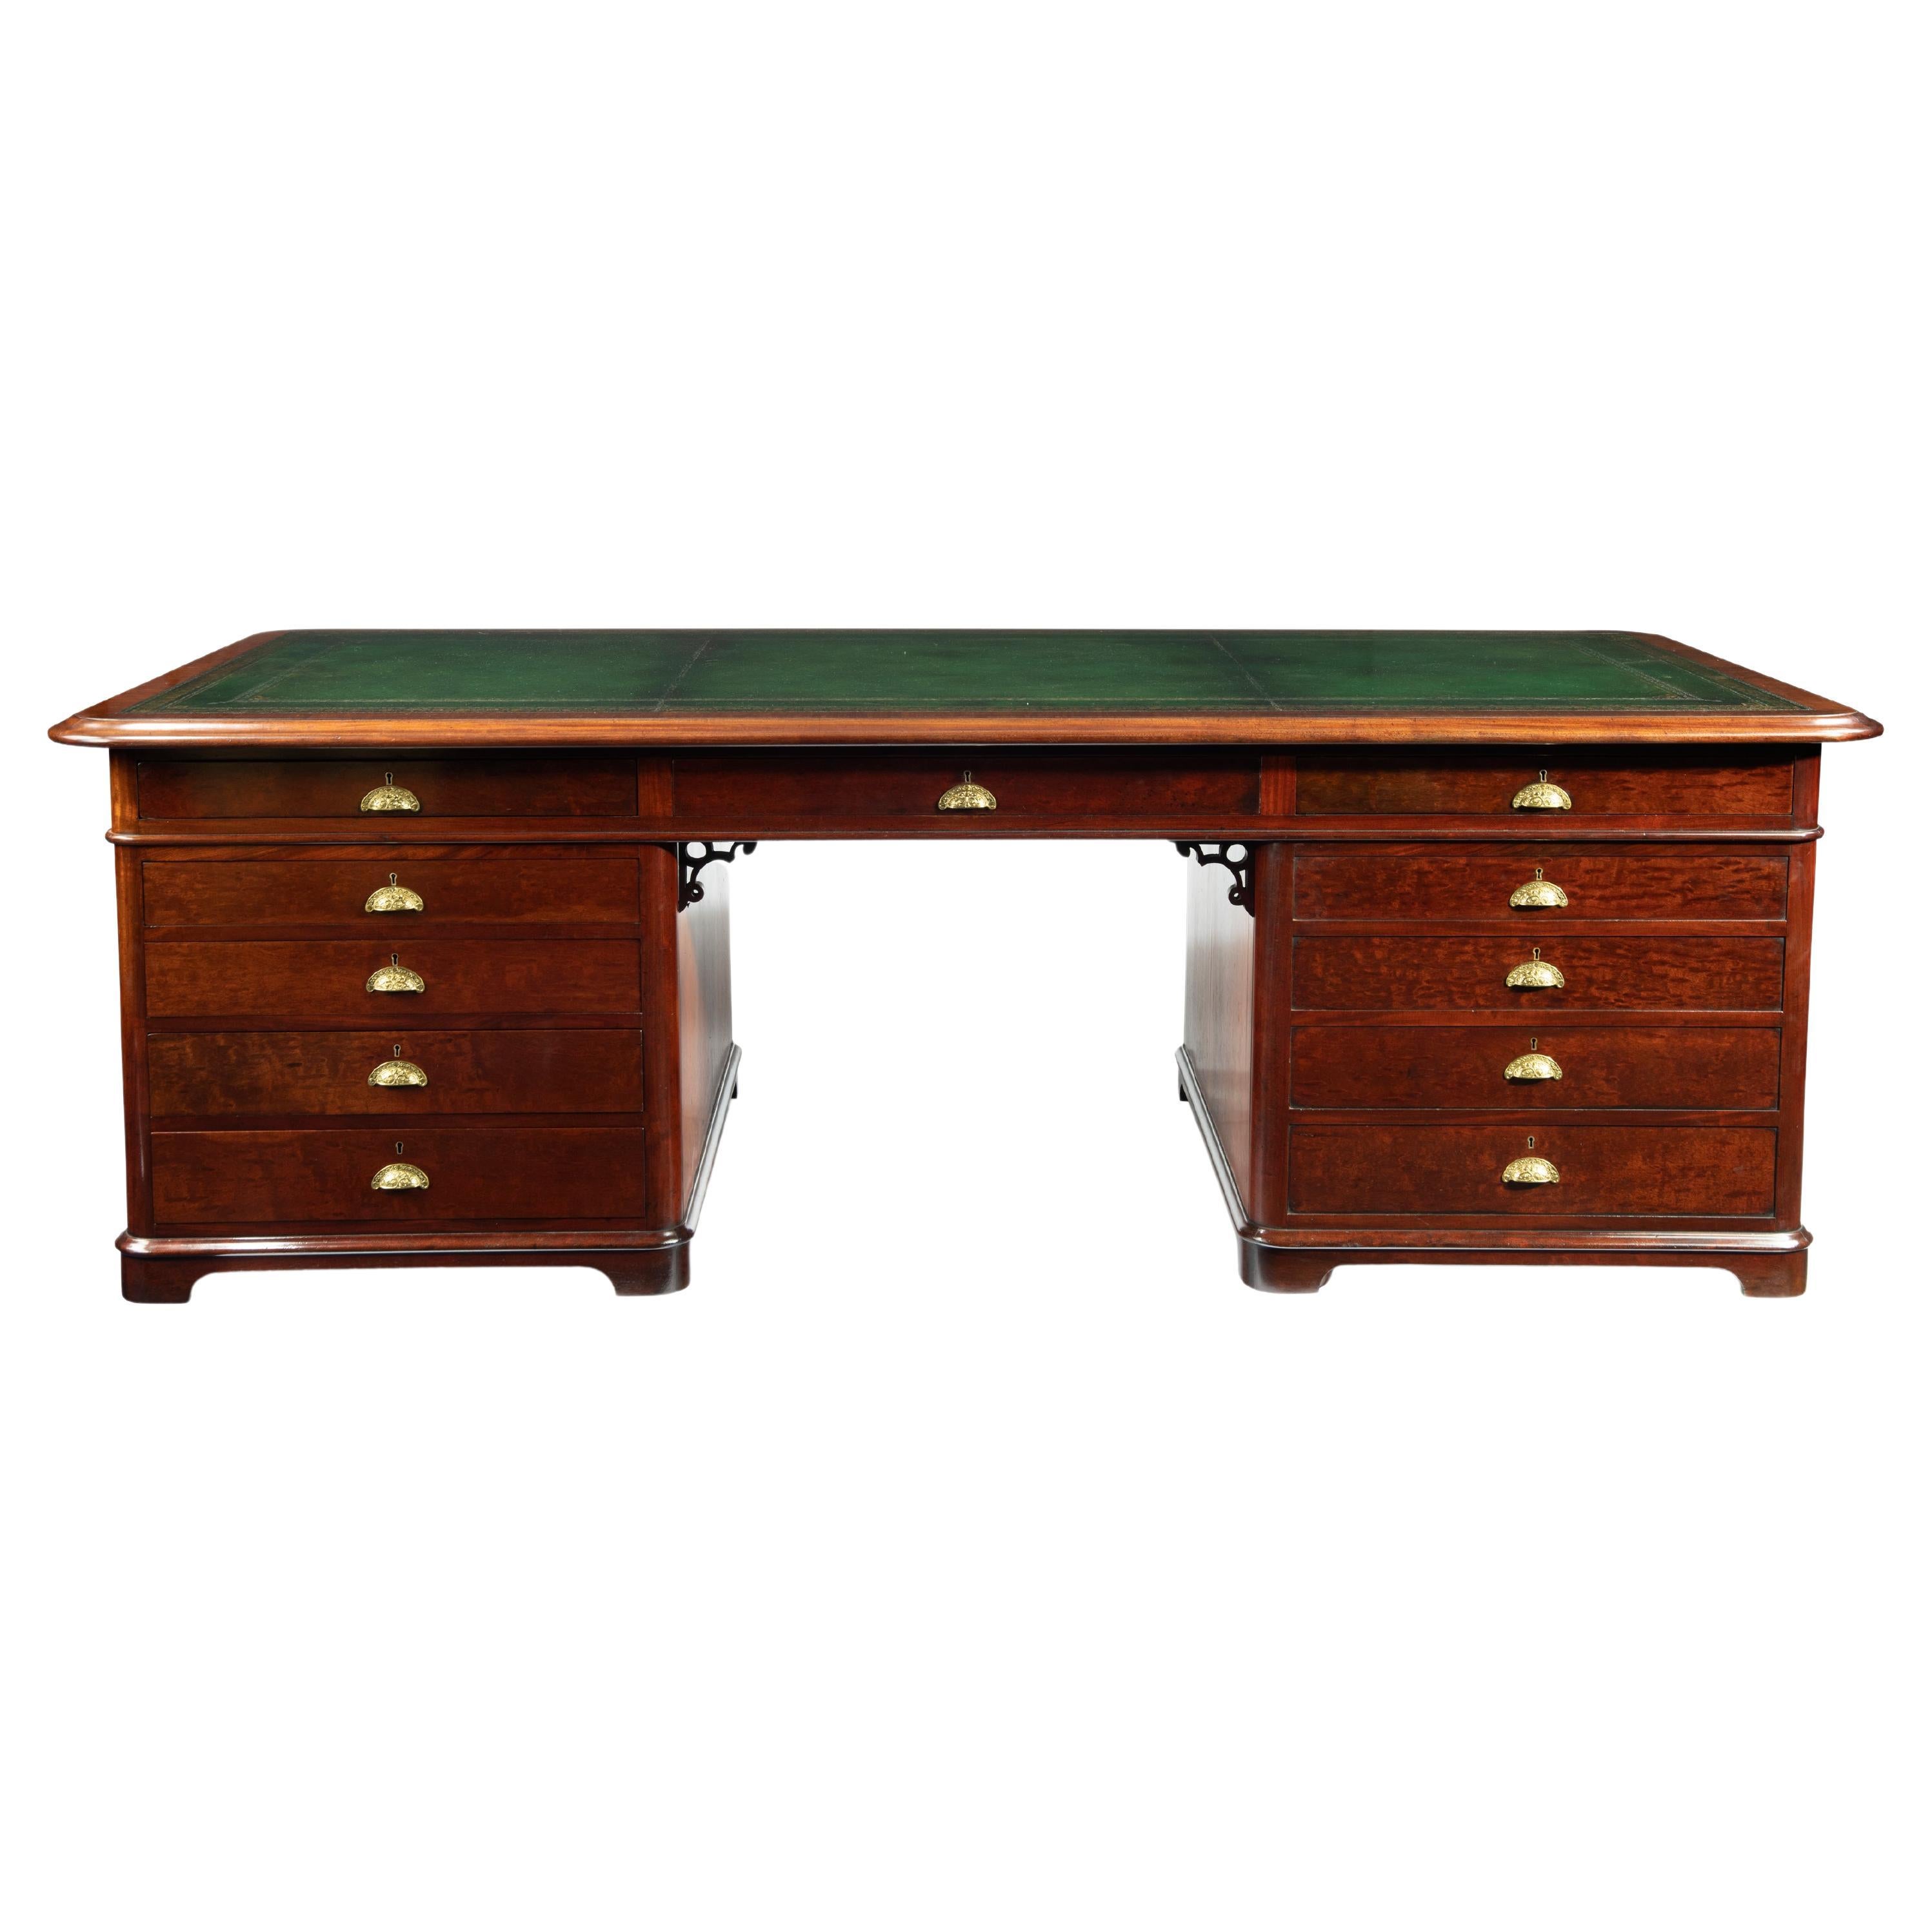 Large and Imposing Victorian Mahogany Partners’ Desk